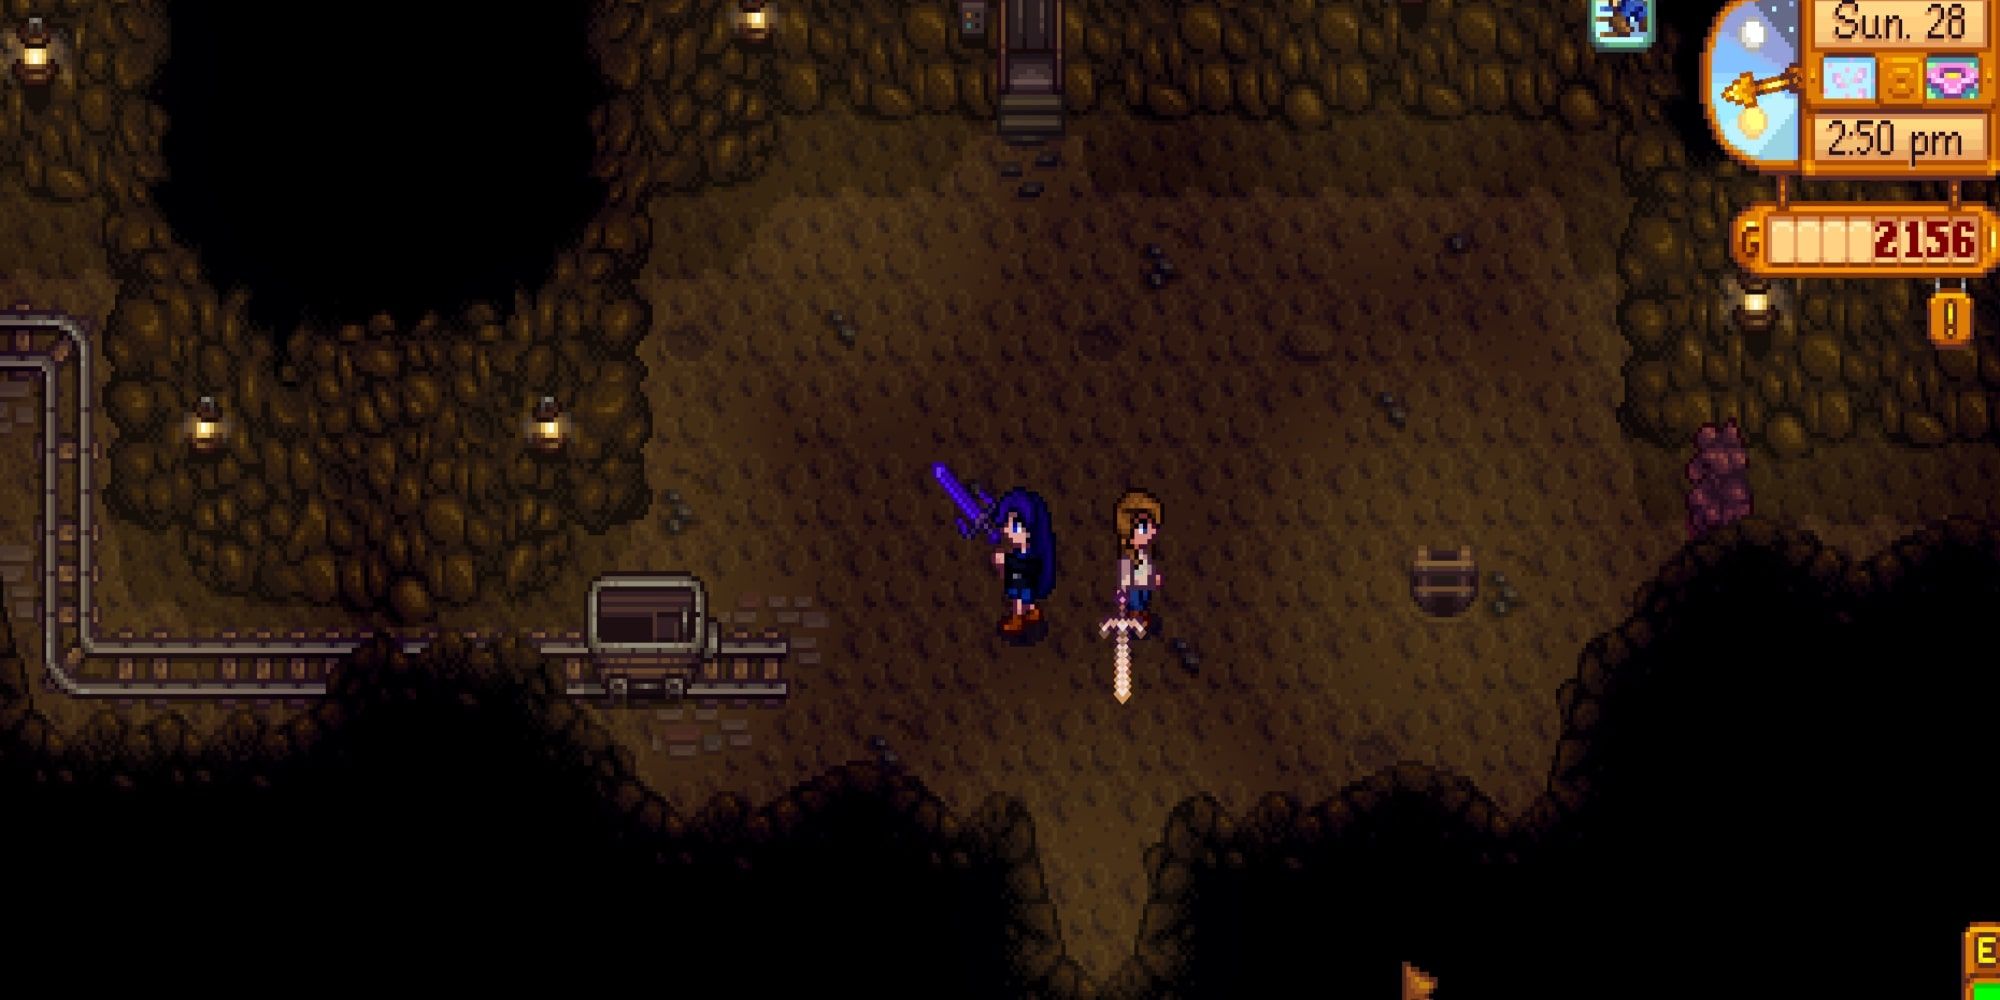 Two players, opposite each other, swinging their swords in the Stardew mines.